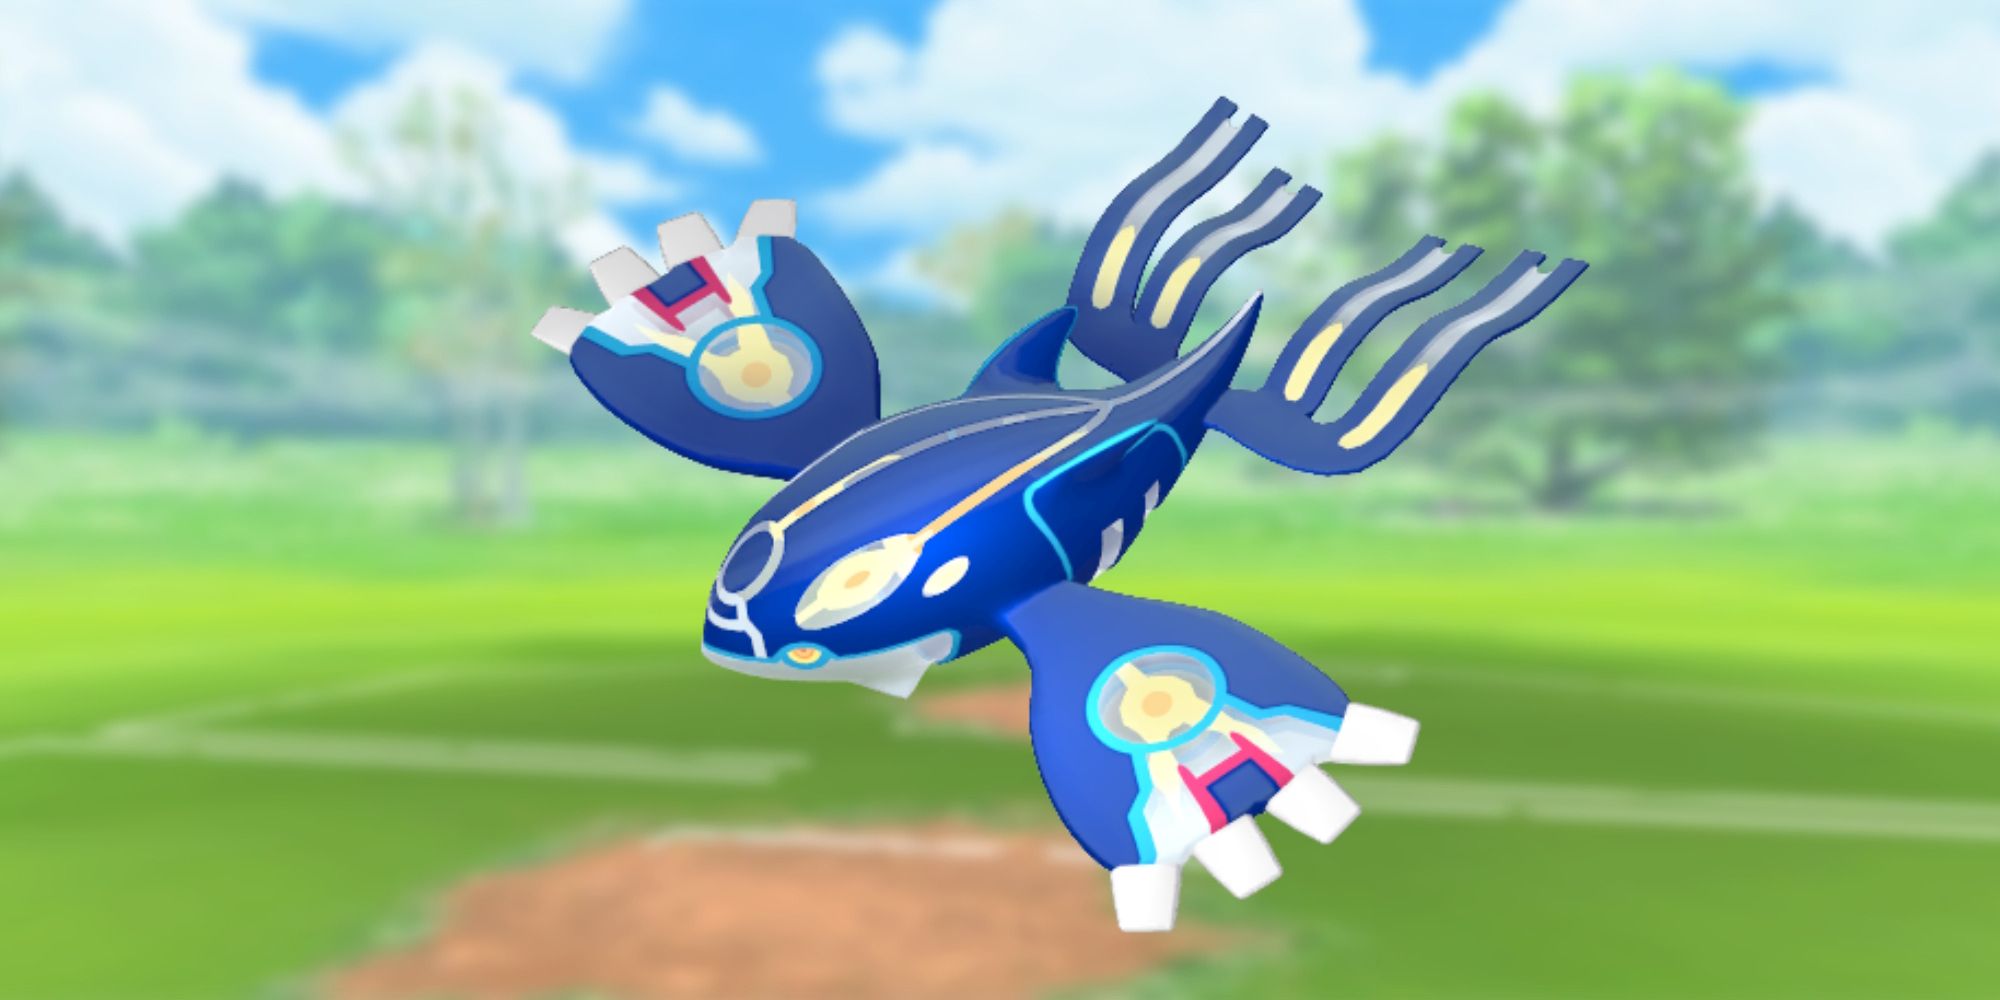 Primal Kyogre from Pokemon with the Pokemon Go battlefield as the background